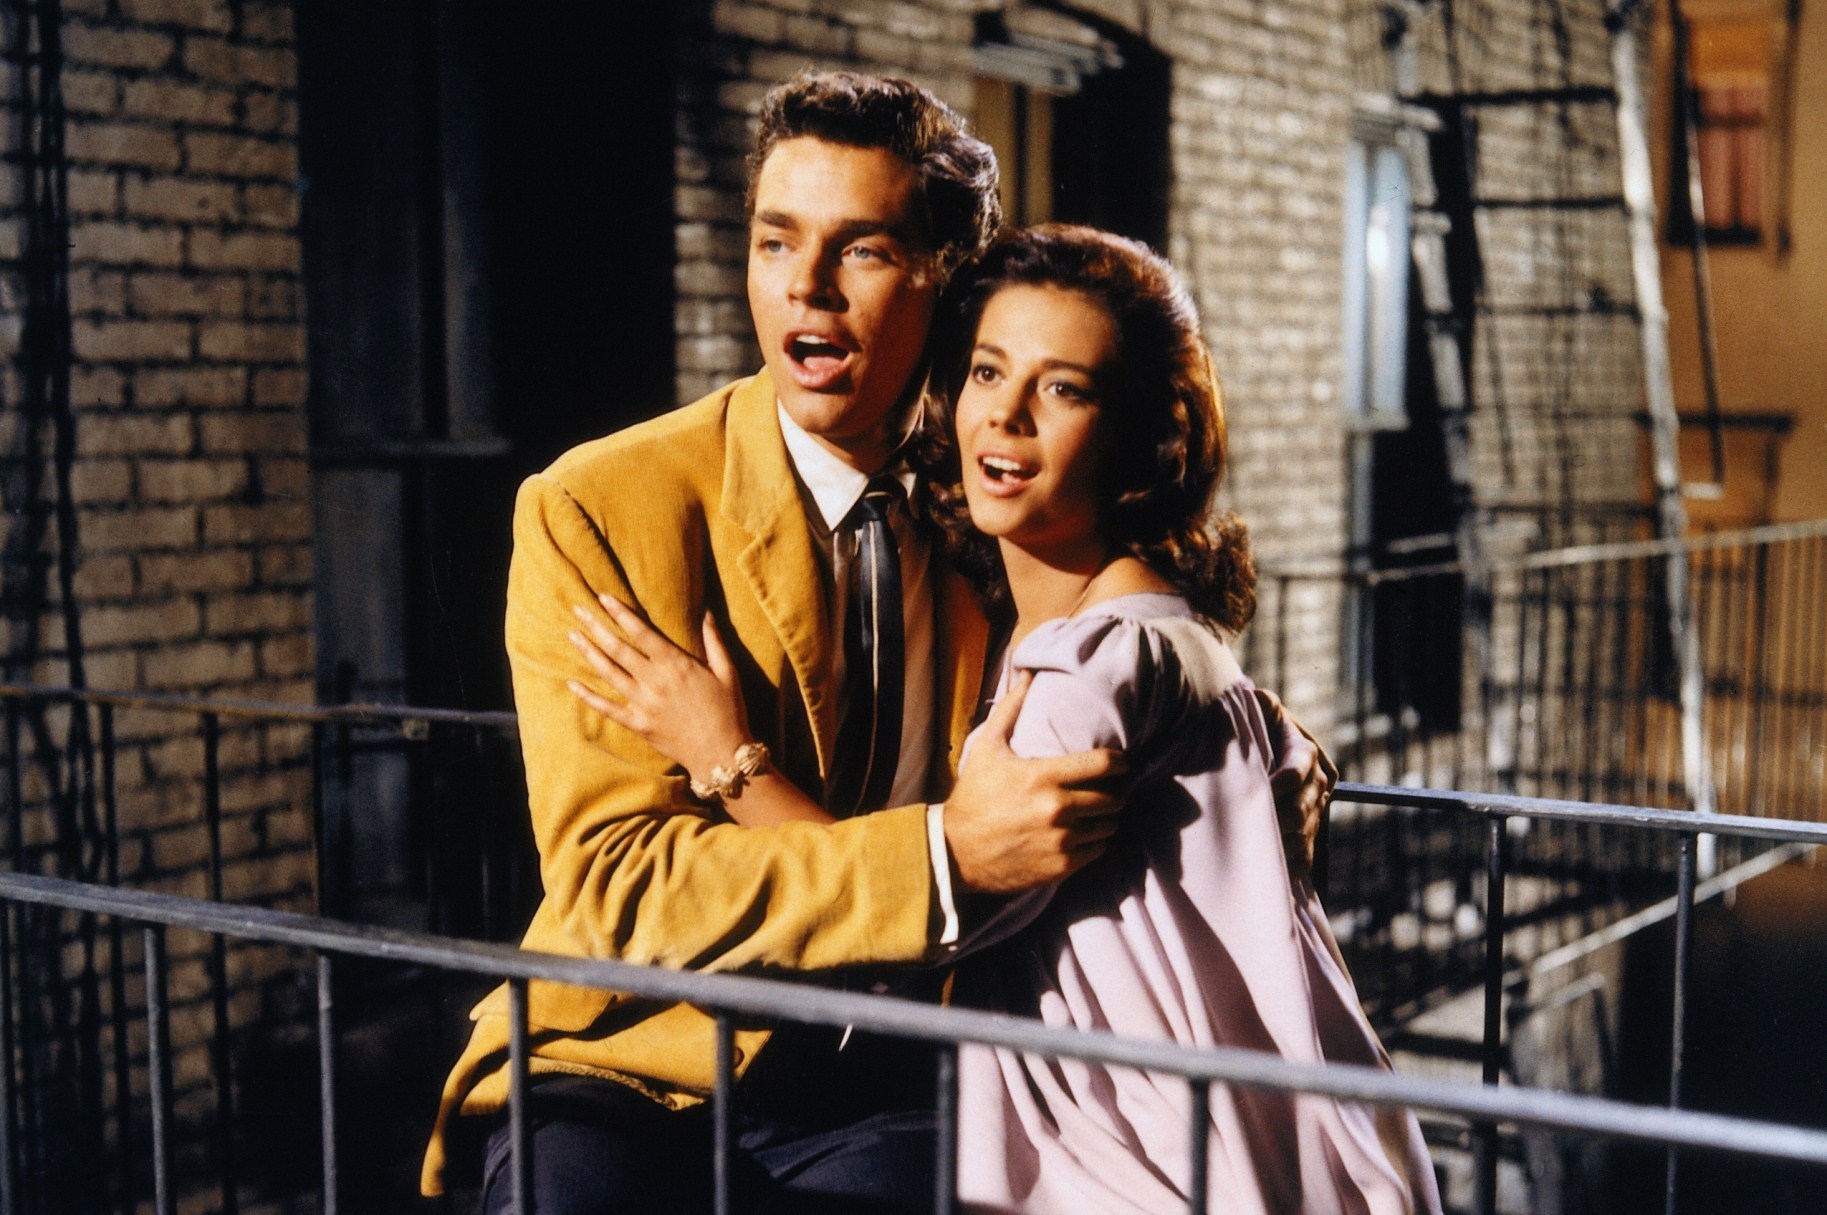 No Place For Us: Interracial Relationships in ‘West Side Story’